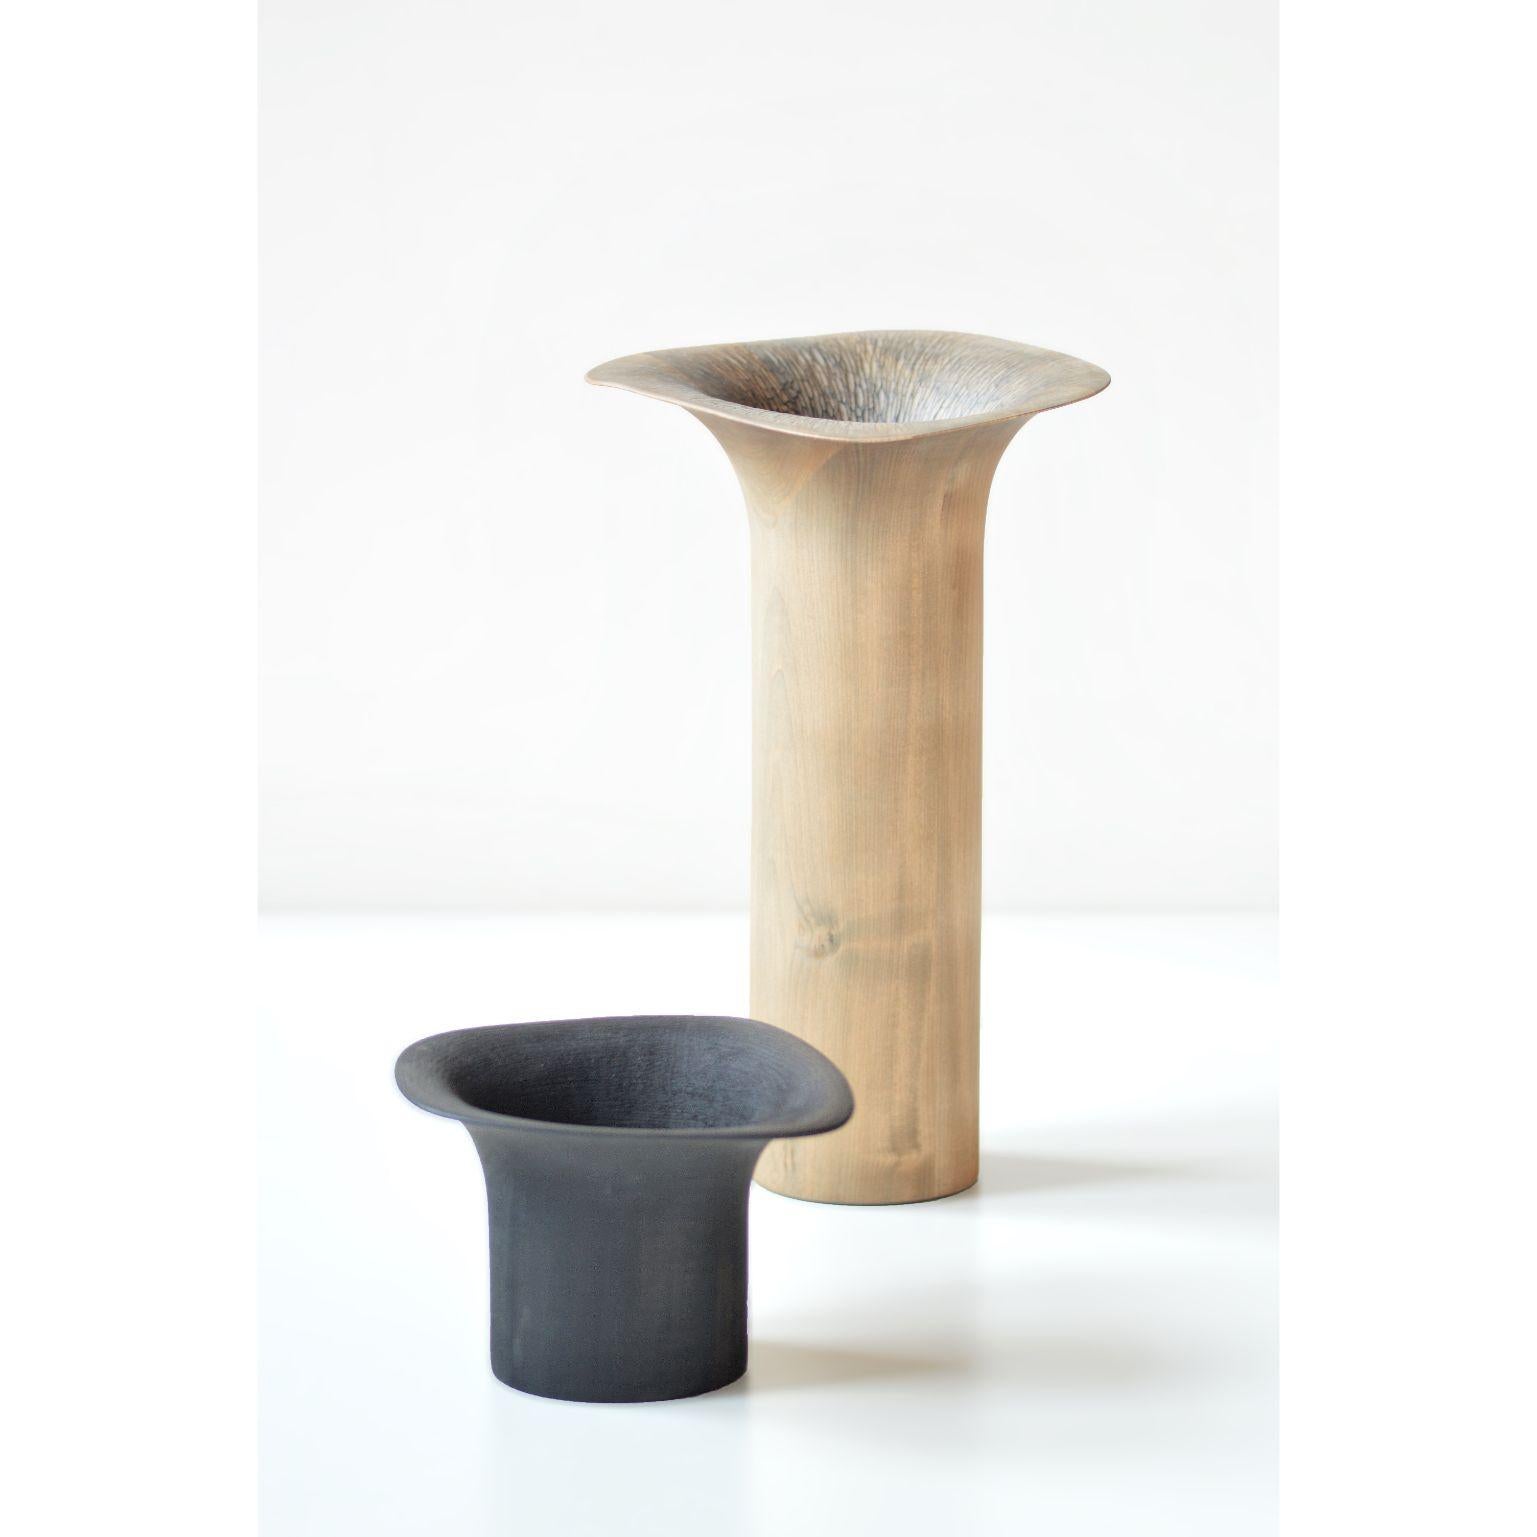 Sussin sculpture - Large - Dark by Antrei Hartikainen
Materials: Linden wood, natural, oil wax, stain, lacquer
Dimensions: 
Width 18- 35 cm
Depth 18- 35 cm
Height 20 - 120 cm

Also Available: different color & sizes

Sisin ( finnish for